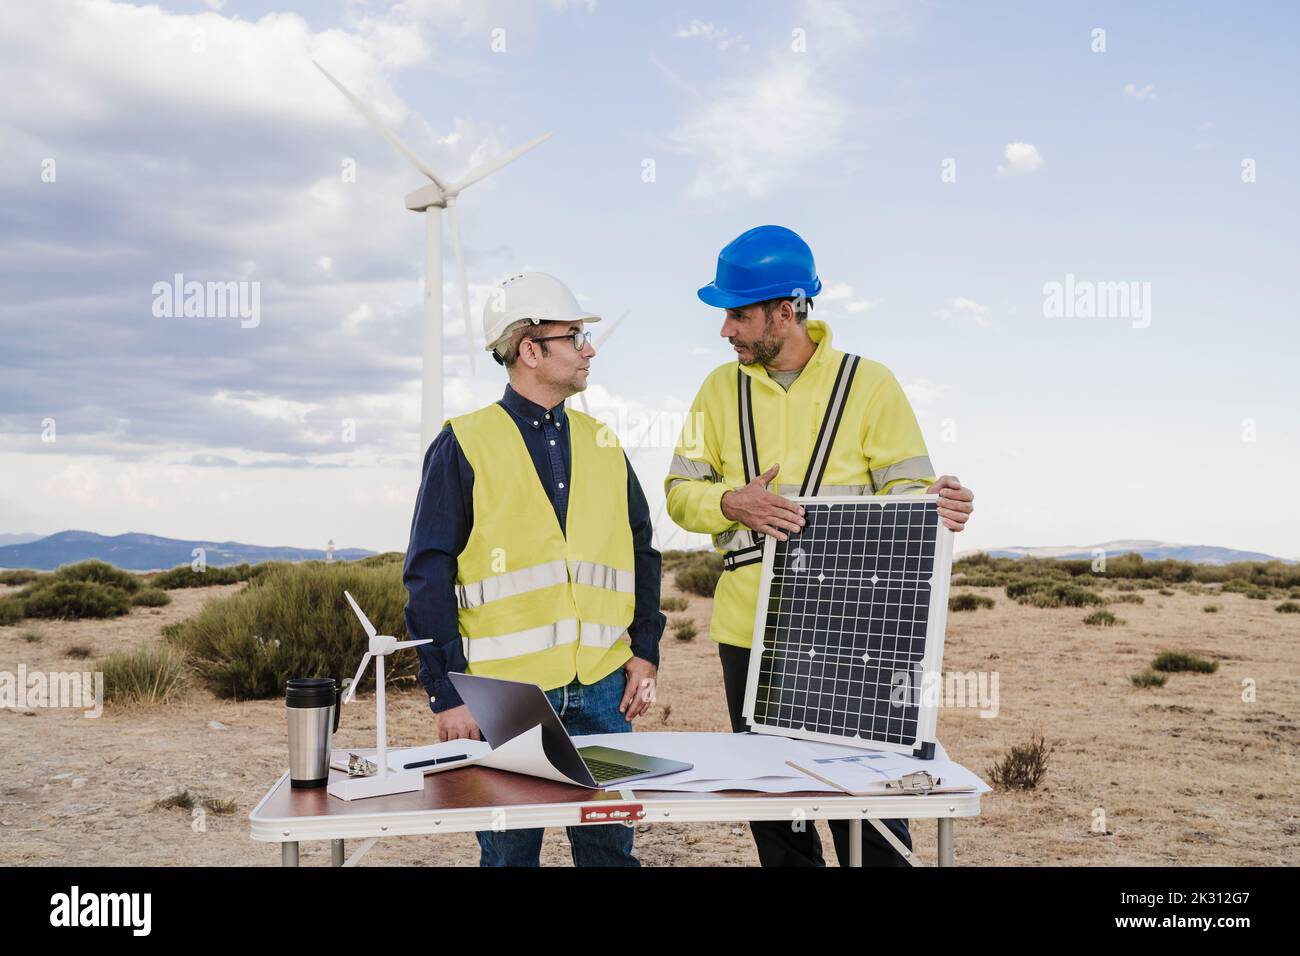 Engineer holding solar panel discussing with colleague at desk at wind farm Stock Photo